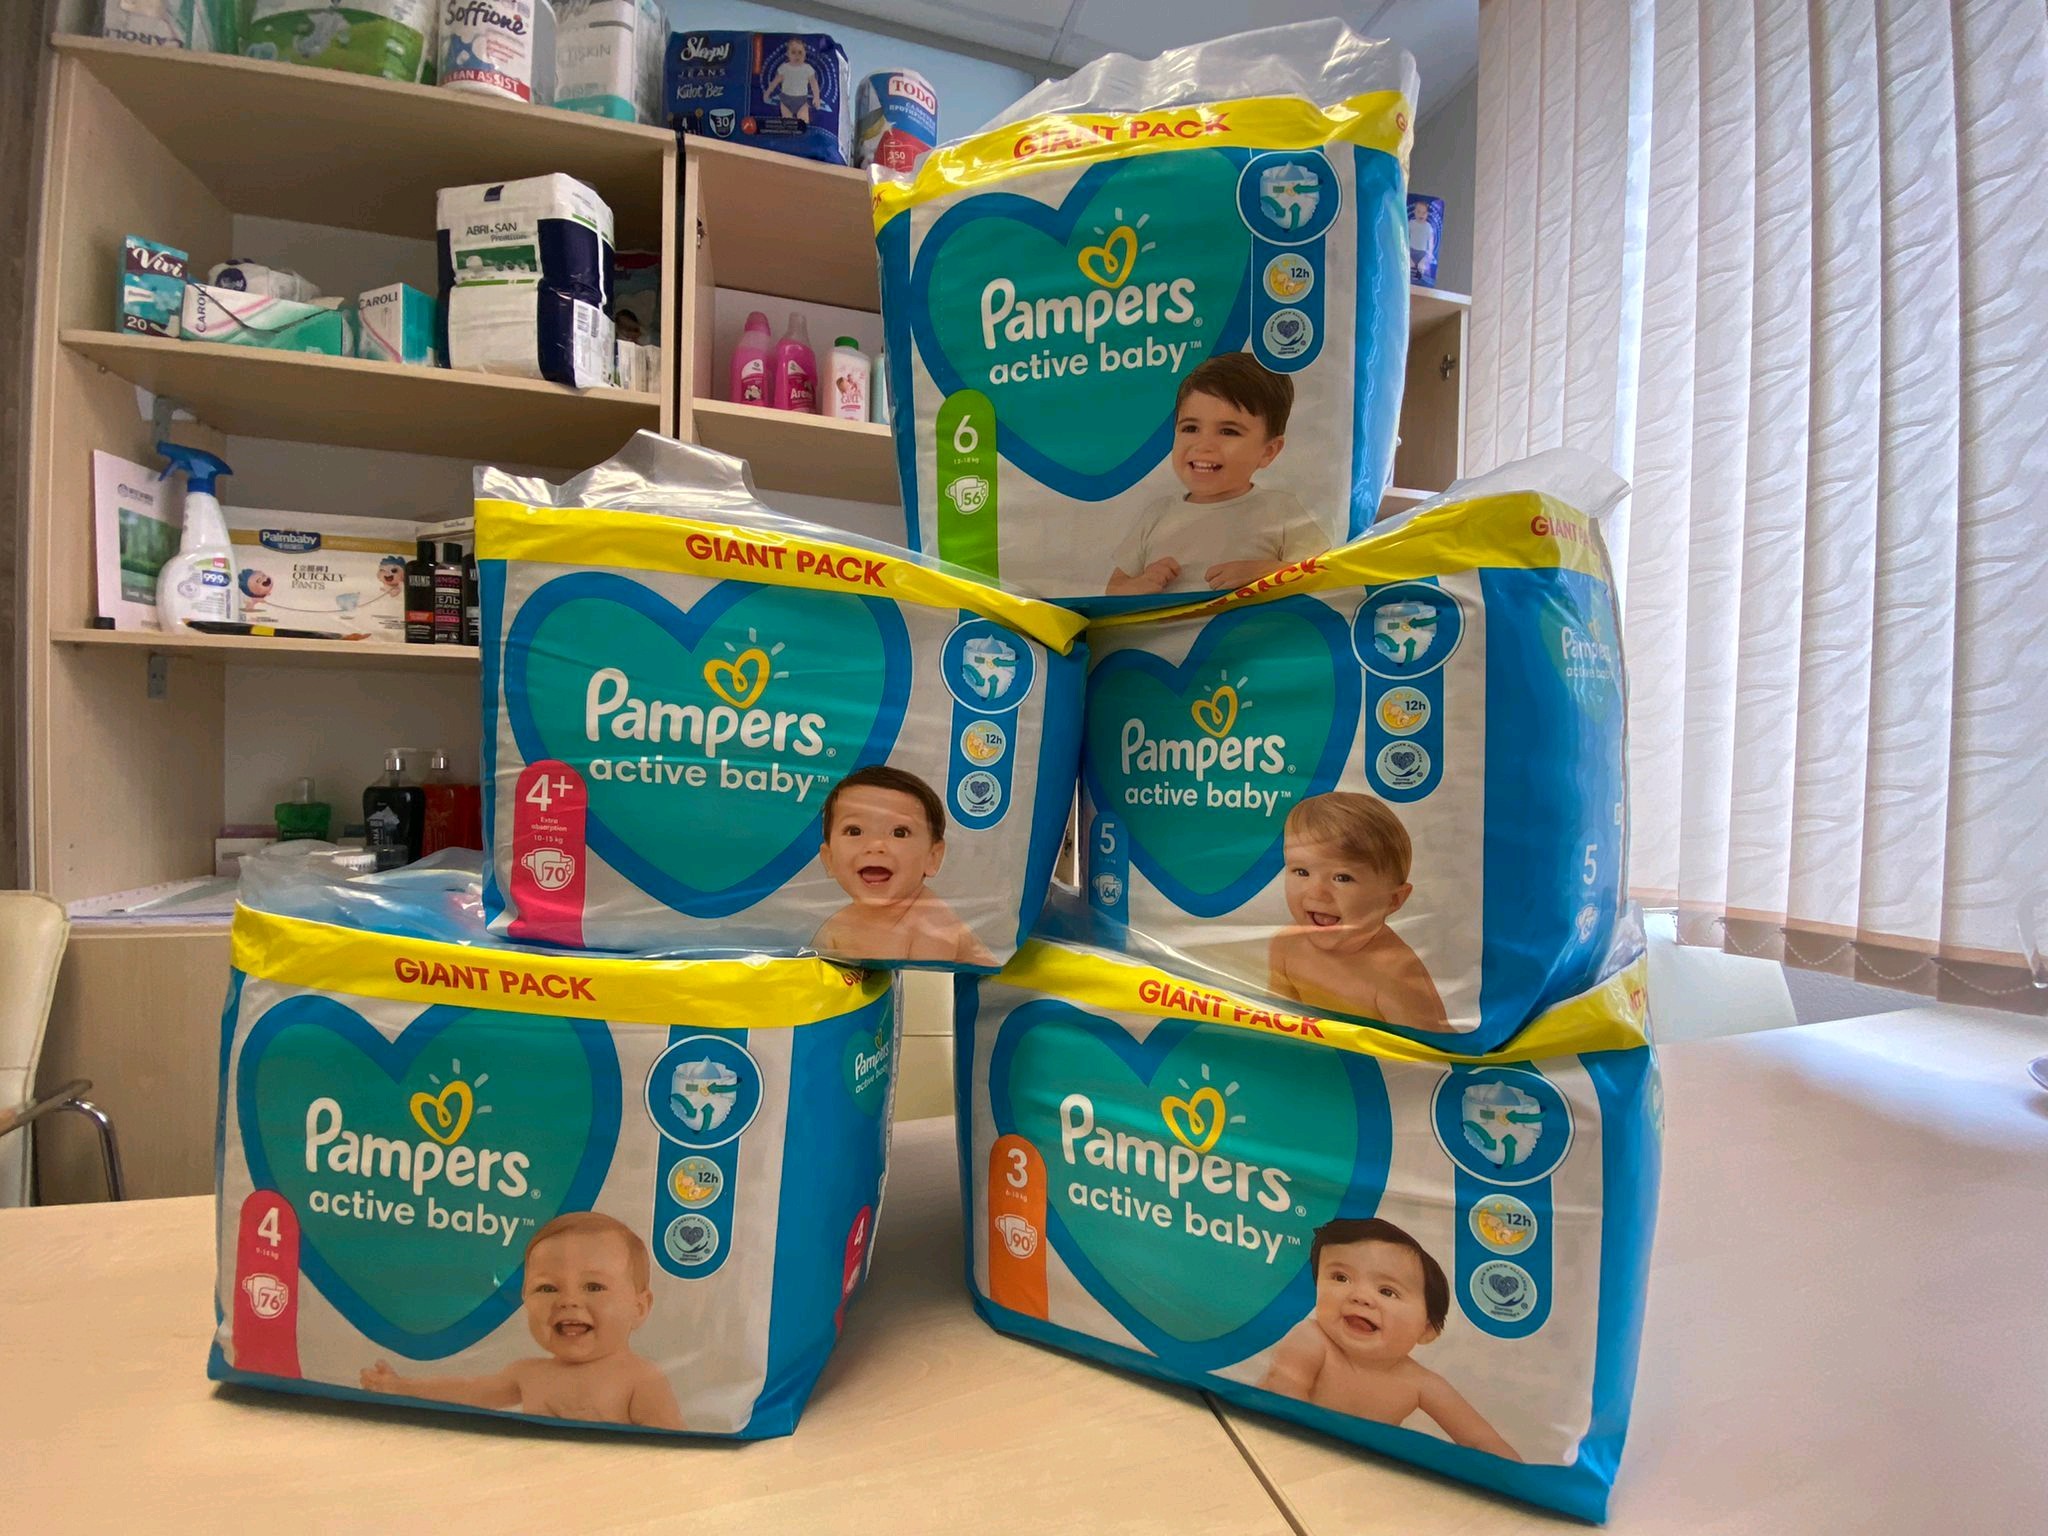 Pampers baby wipes stack on the table